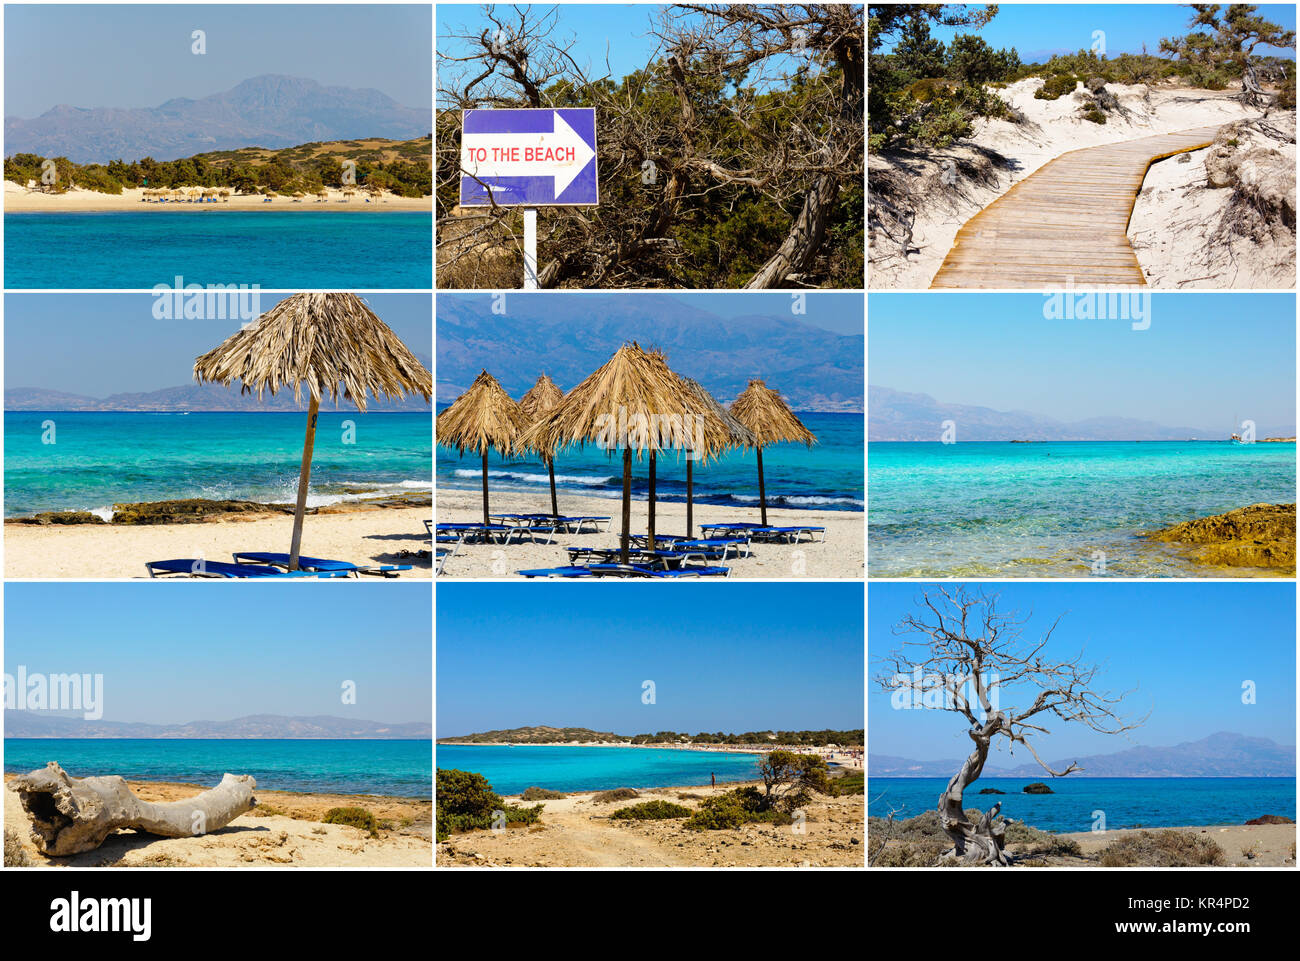 Photo collage with images of Chrissi Island, near Crete, Greece Stock Photo